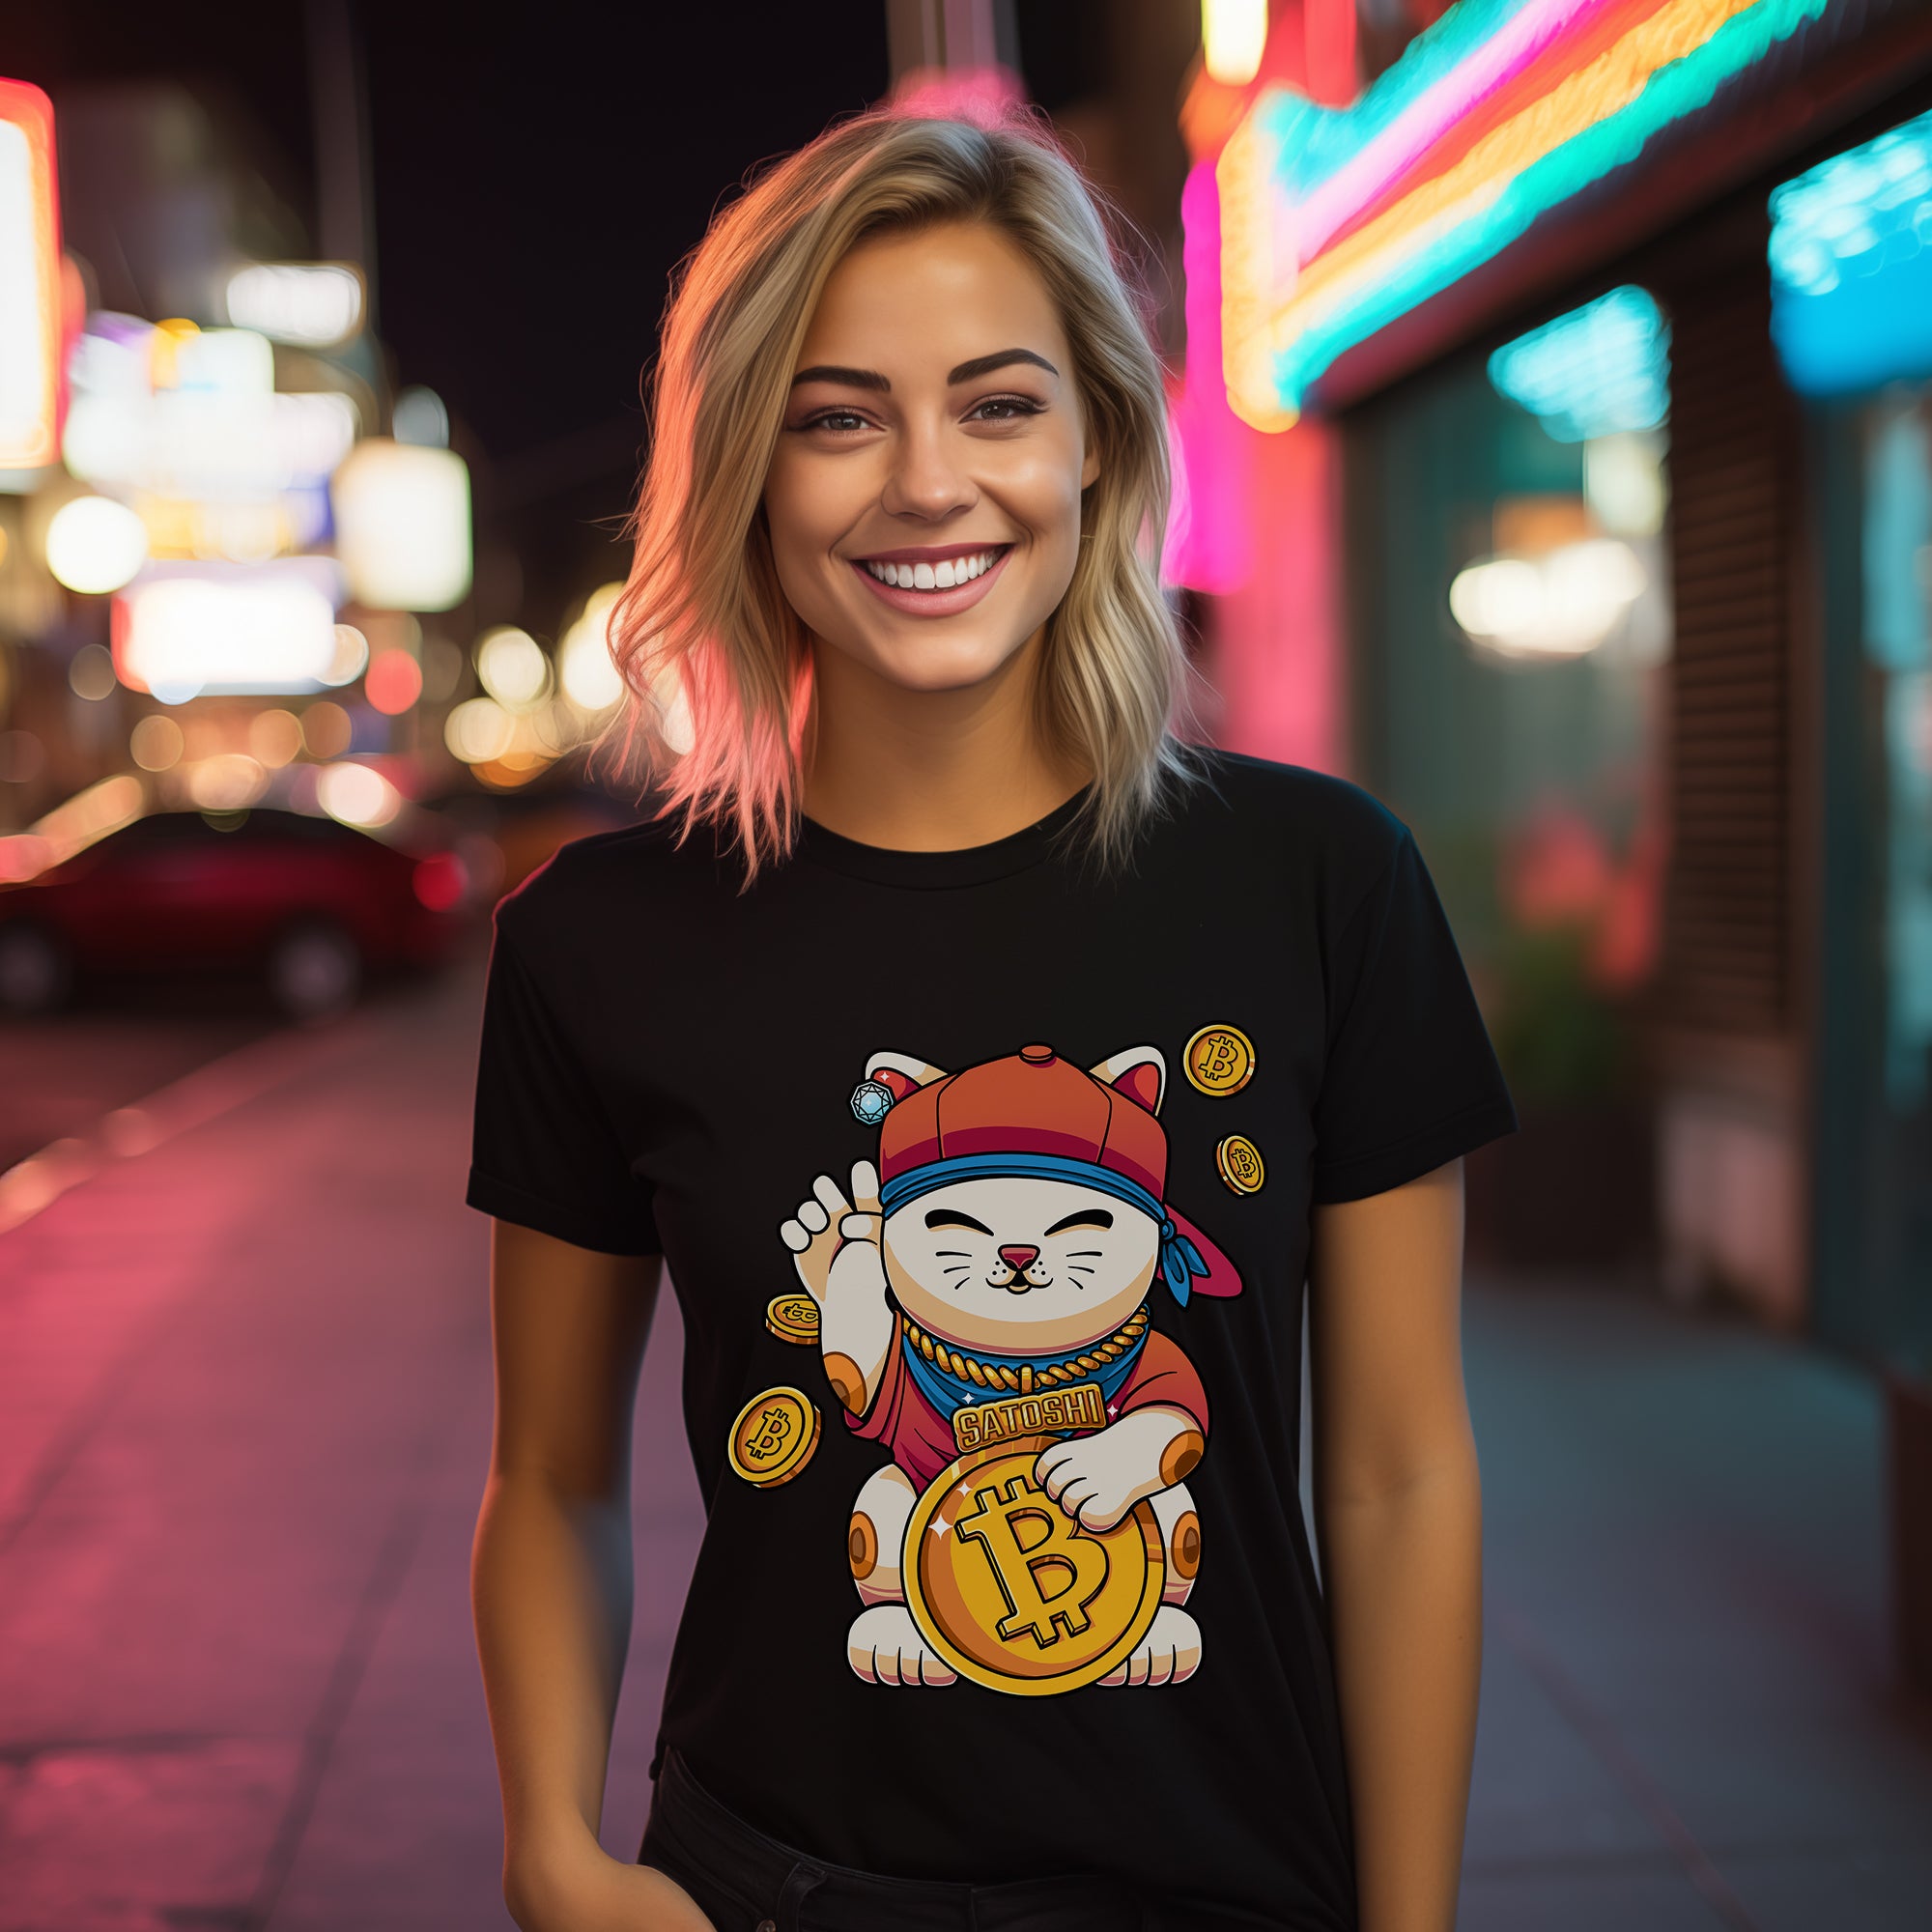 Bitcoin Clothing - Satoshi Lucky Cat T-Shirt worn by female model (front view).